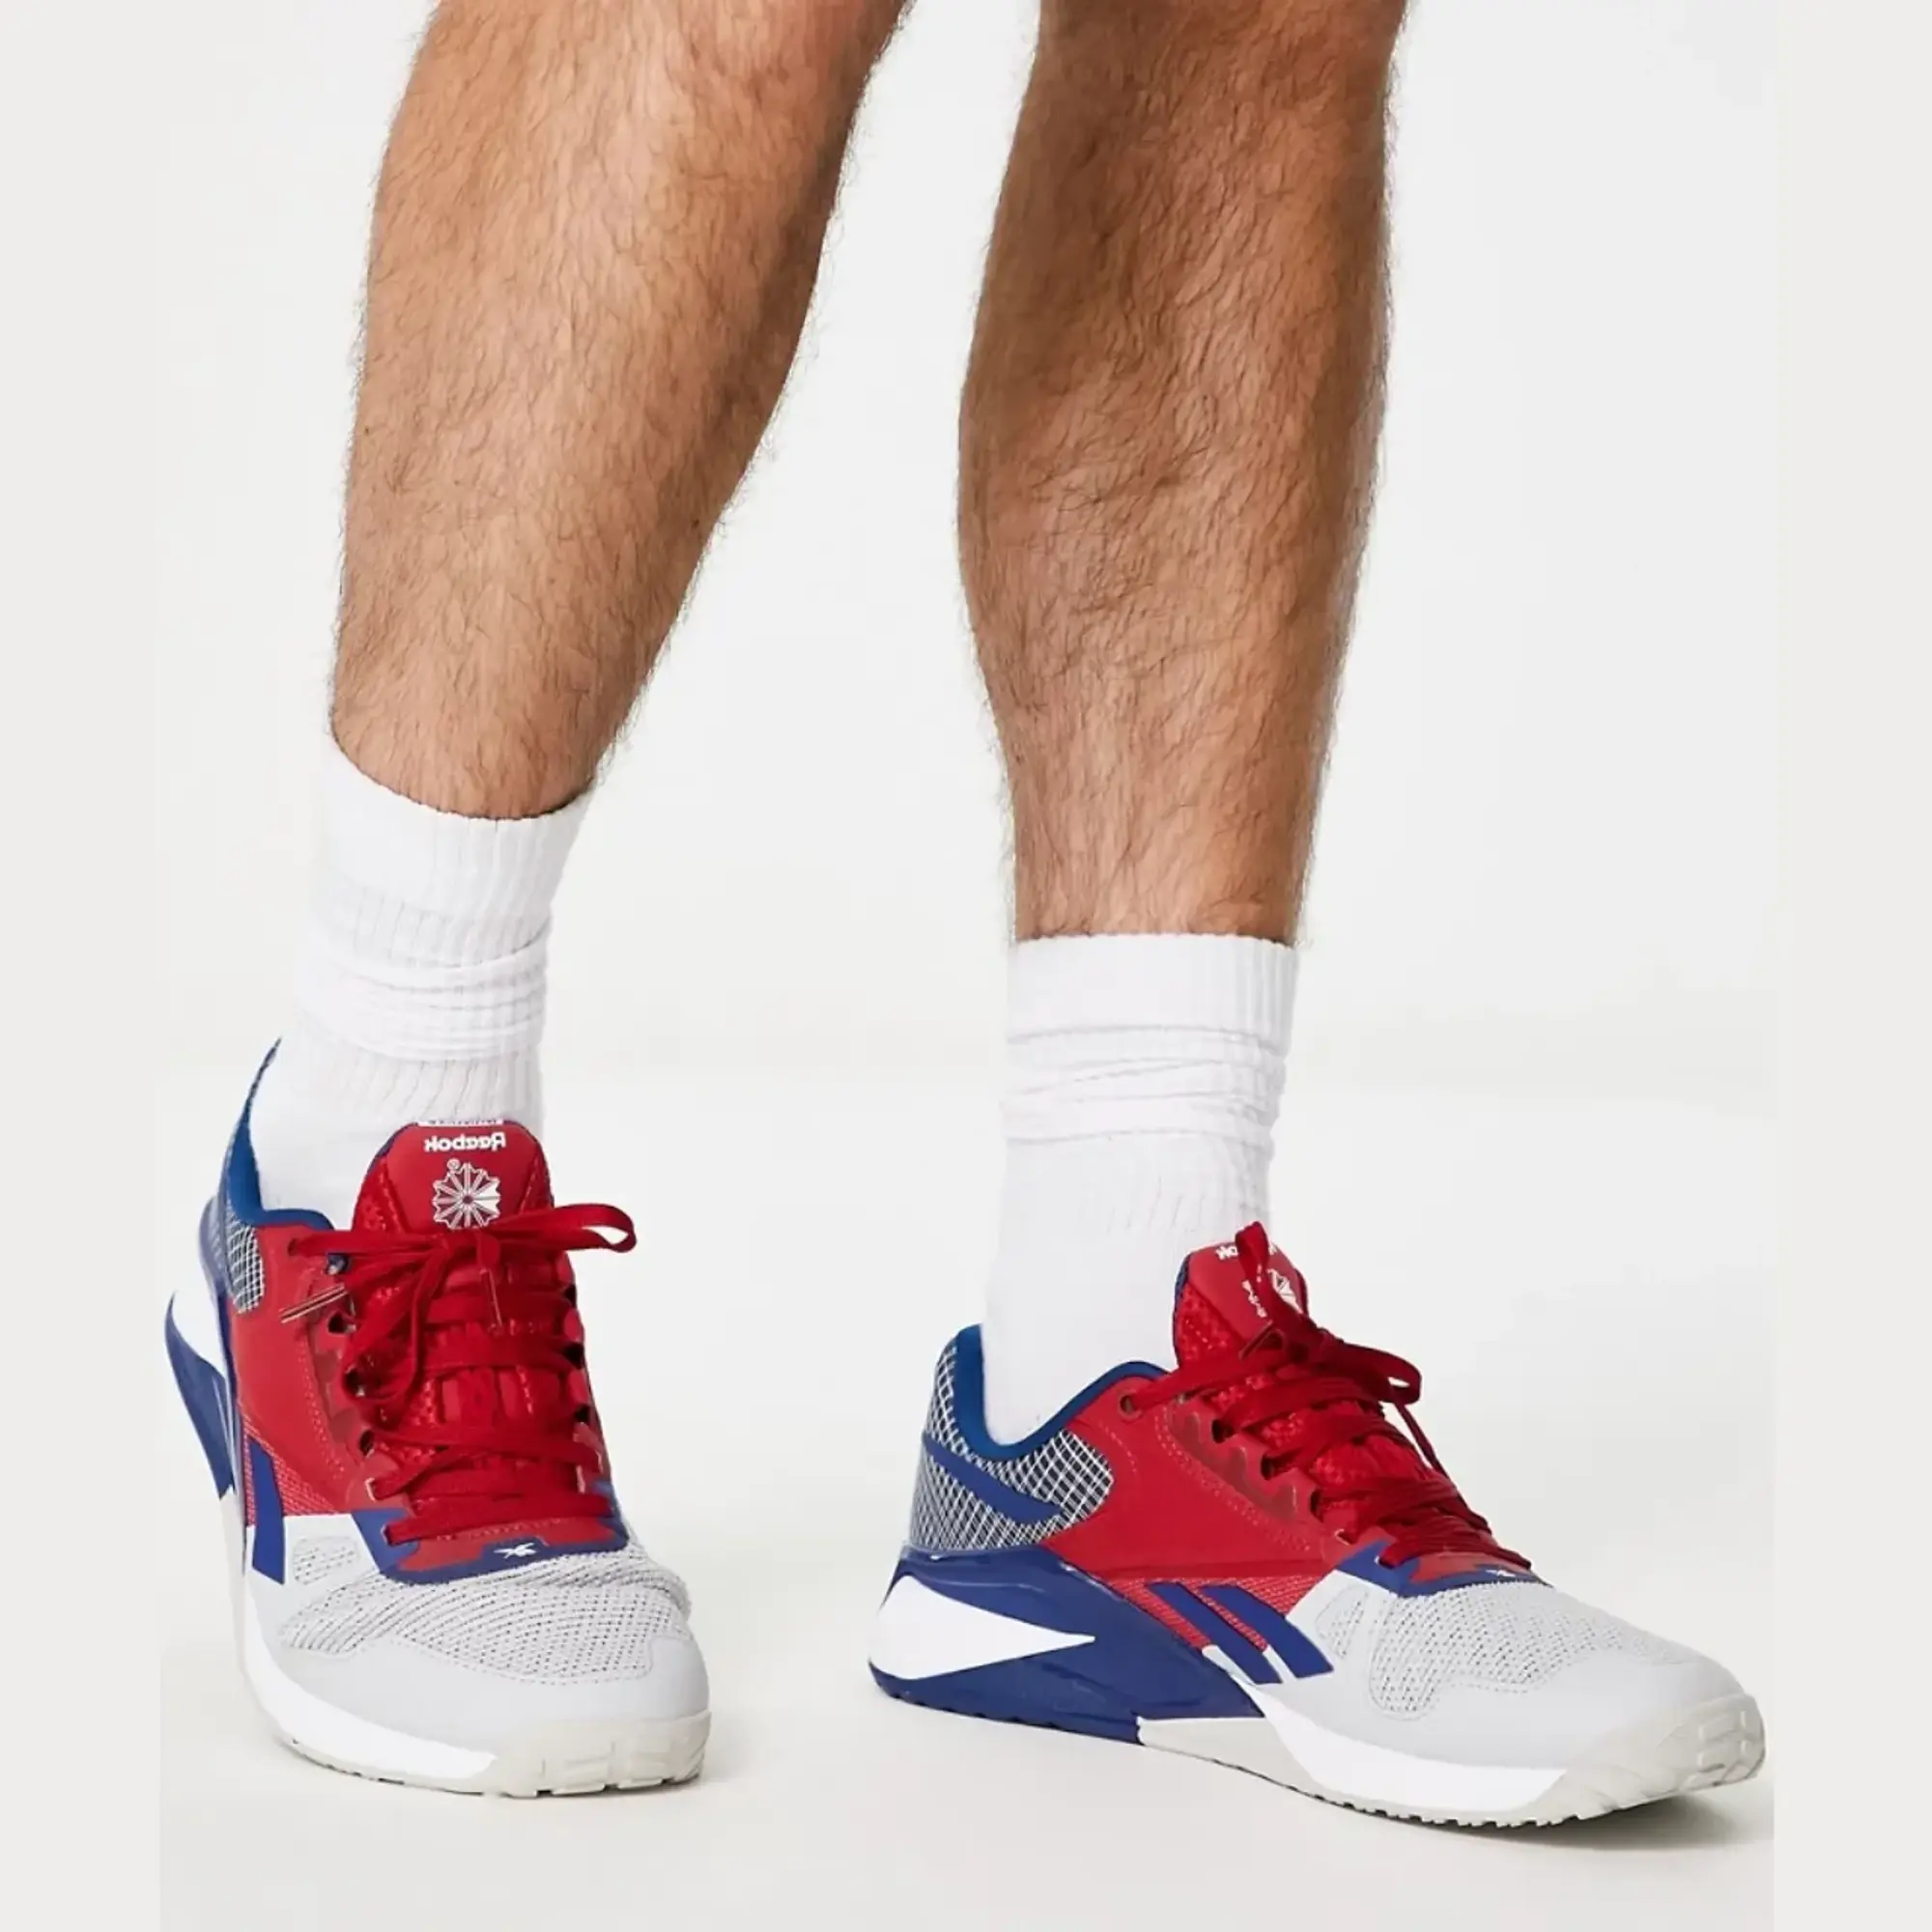 Reebok Training Nano 6000 Trainers In Blue And Red-Multi